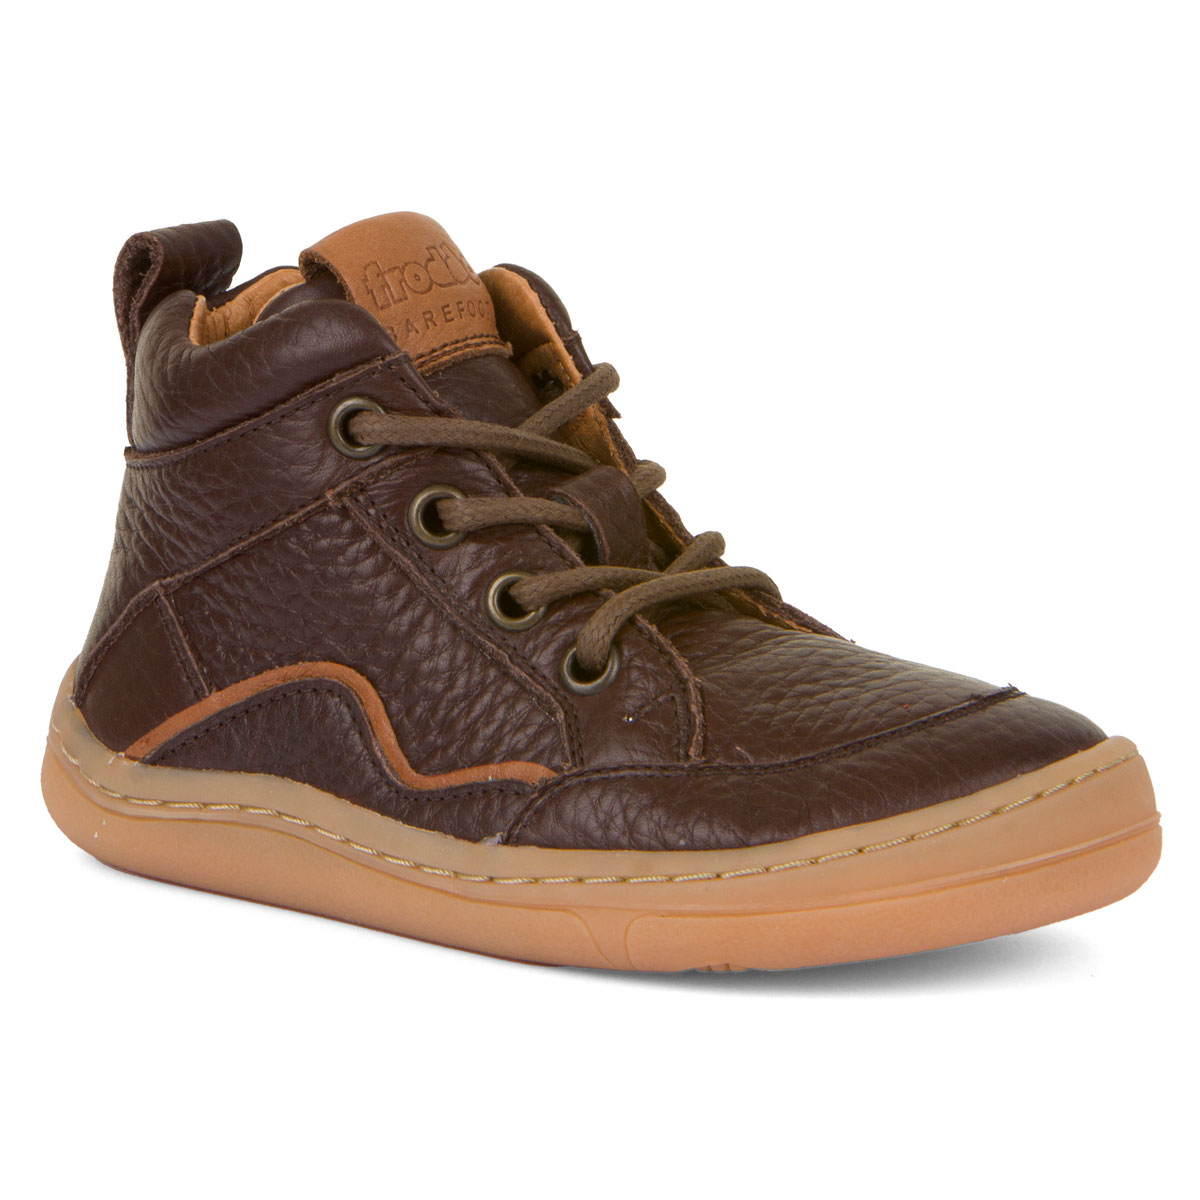 Barefoot Lace-Up brown